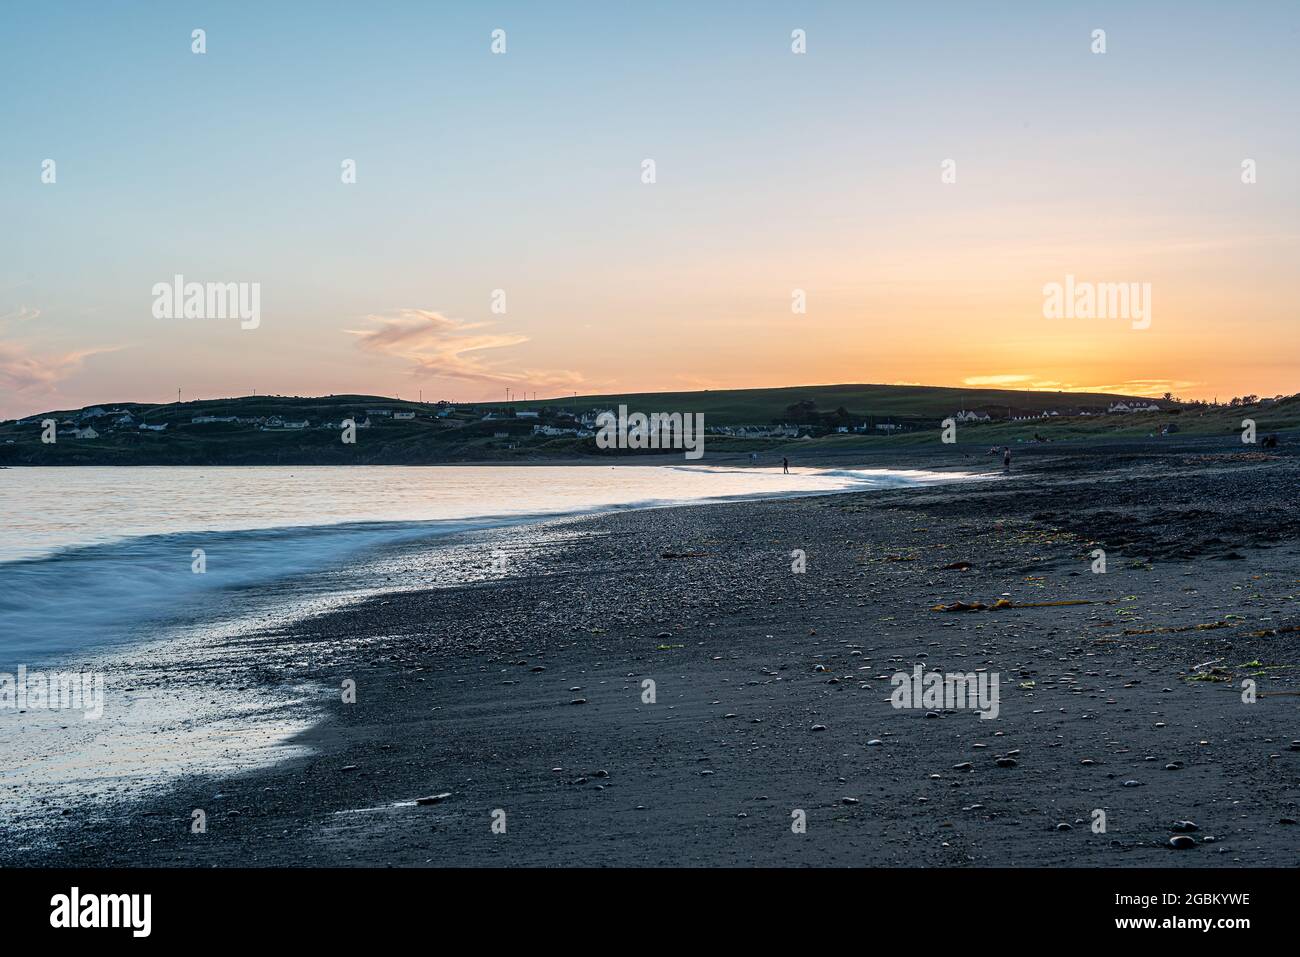 A Very Beautiful and Peaceful Evening Setting at Owenahincha Beach, West Cork. Such a pleasant and tranquil location. It can be very busy in summer. Stock Photo